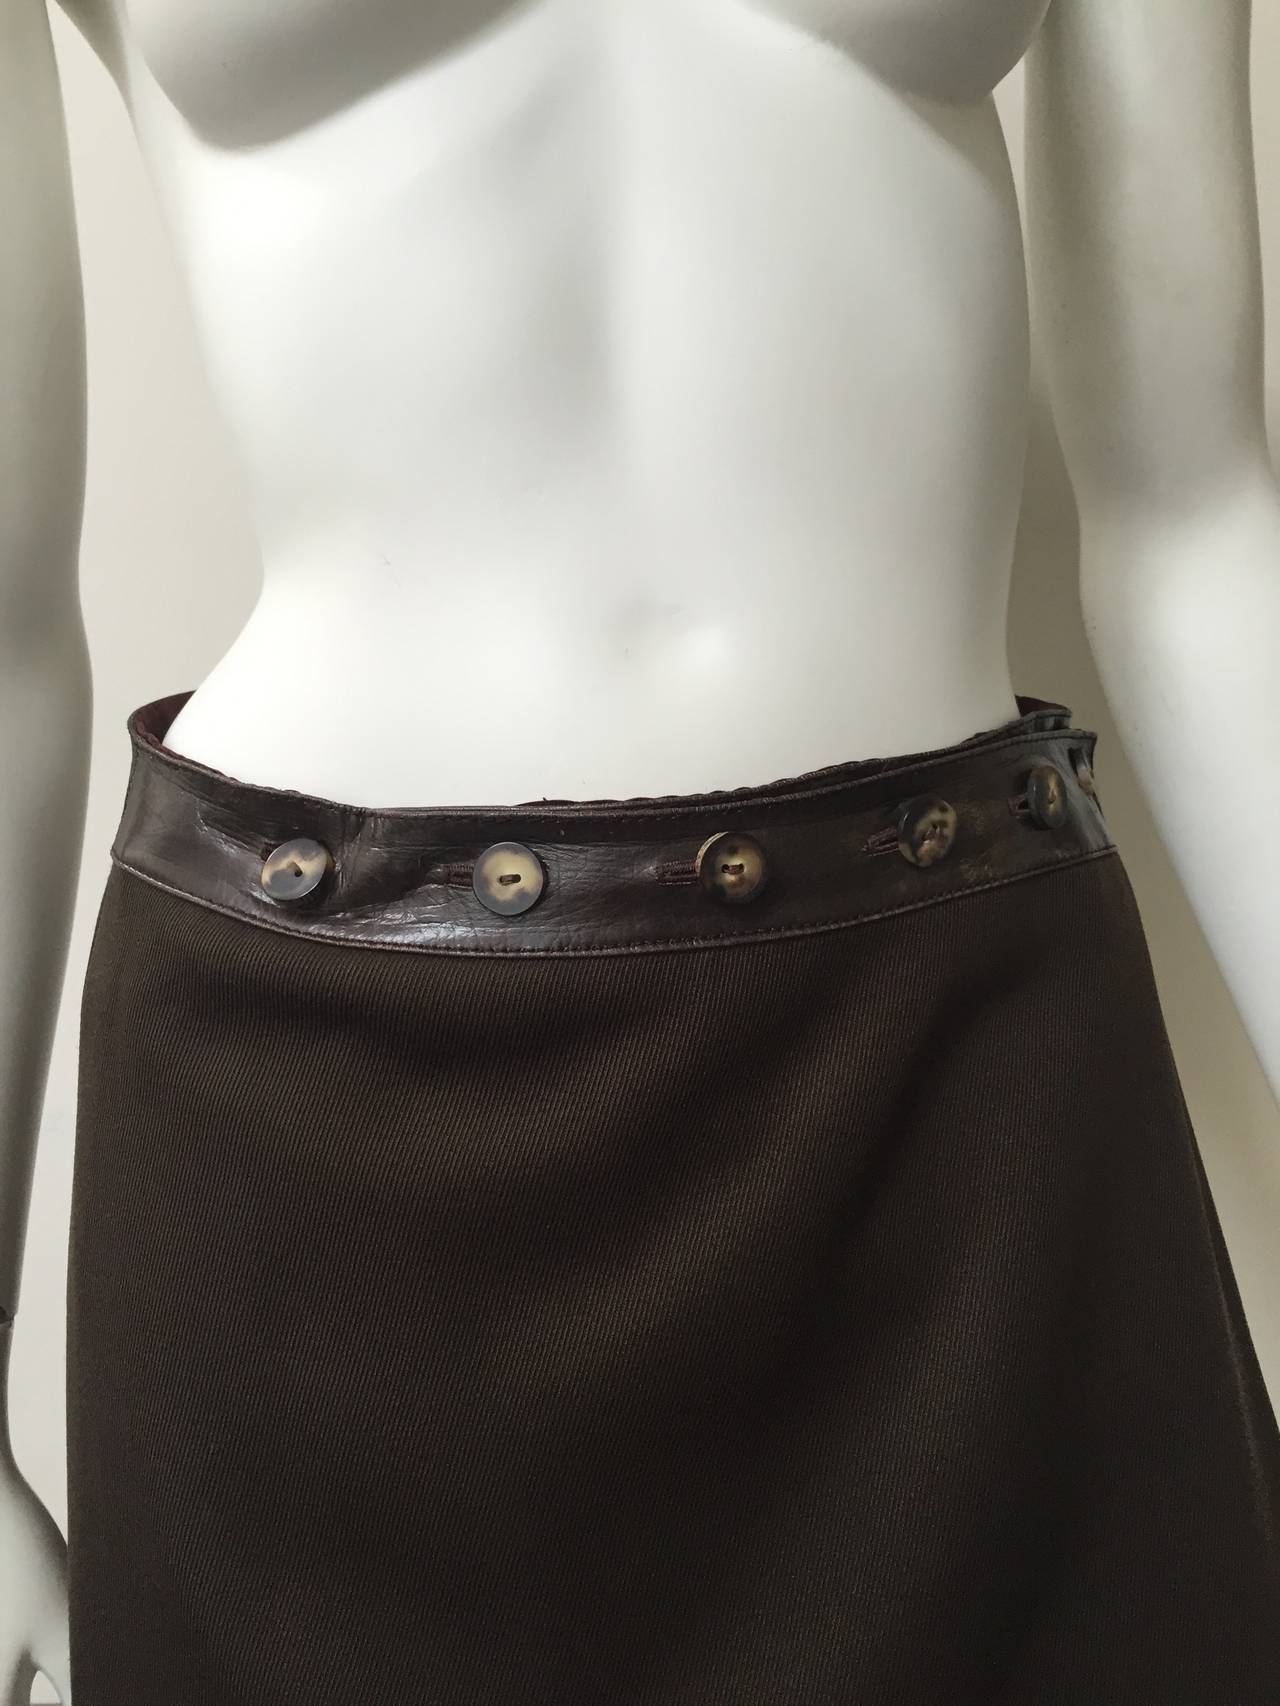 Celine 1970s wrap wool skirt with brown leather trim with 6 buttons size 6. 
Made in Italy.
Skirt is lined.
Measurements are:
28" waist
40" hips
25" skirt length.